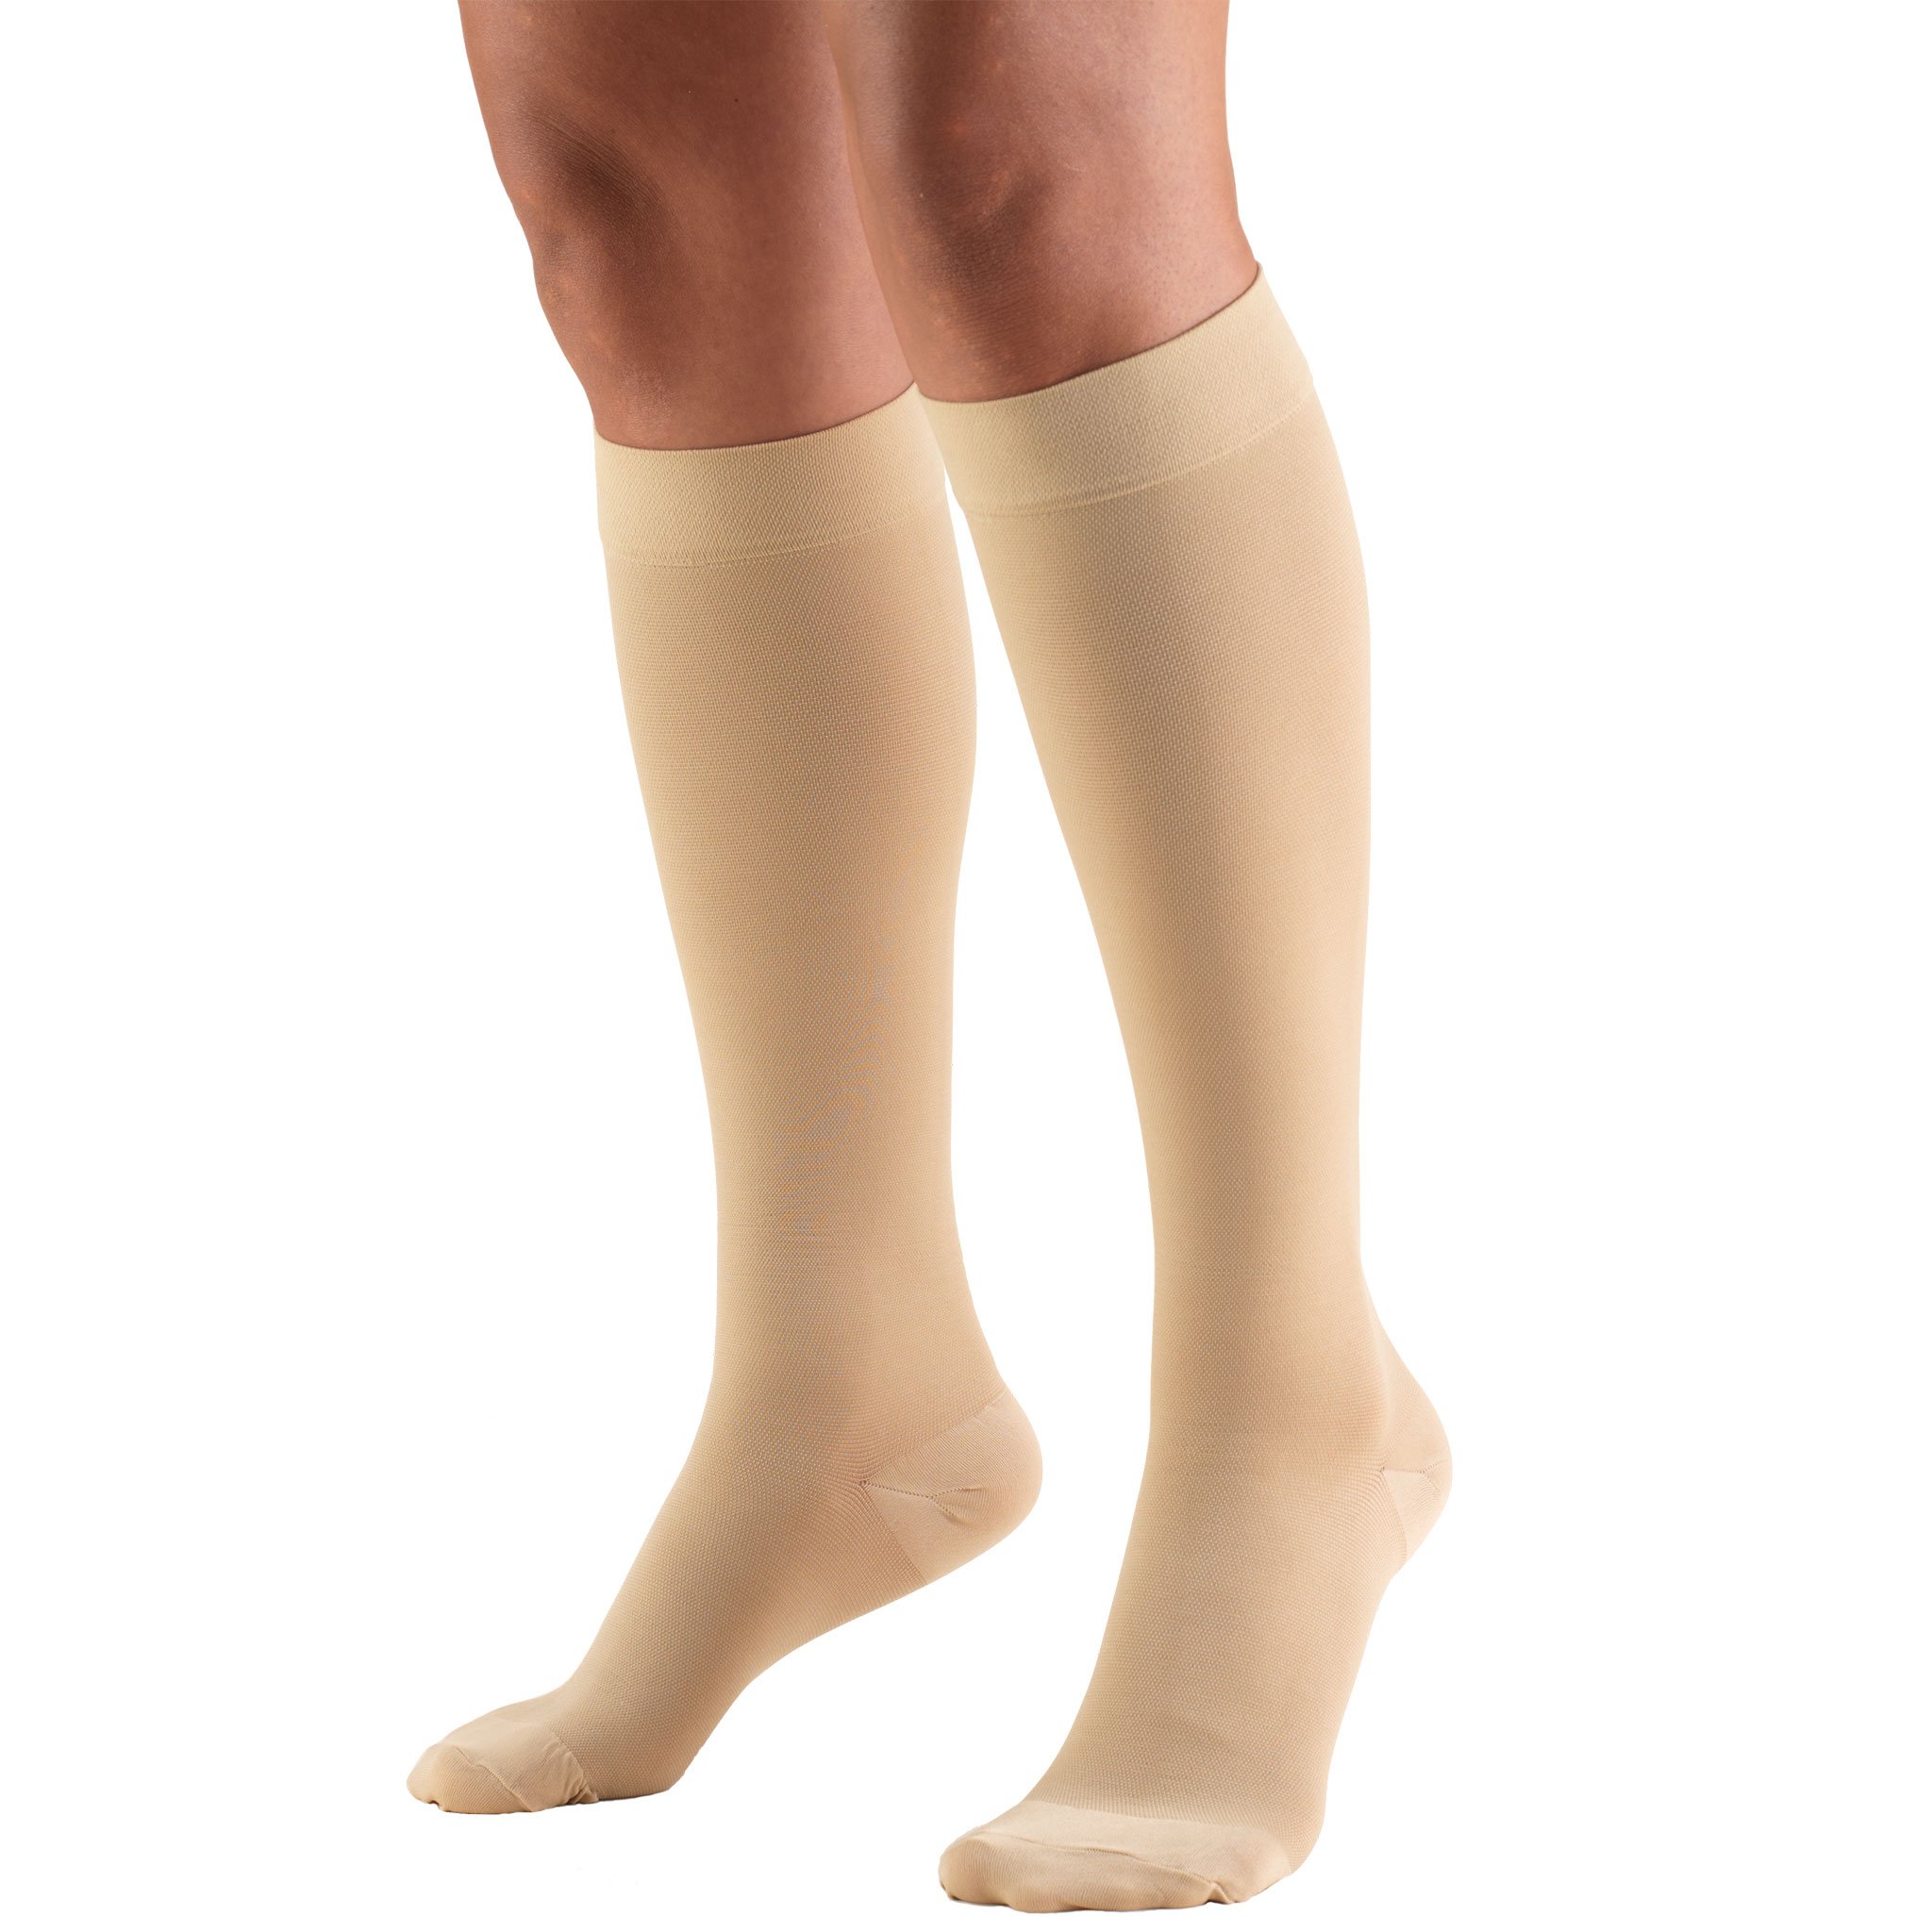 Truform 30-40 mmHg Compression Stockings for Men and Women, Knee High Length, Closed Toe